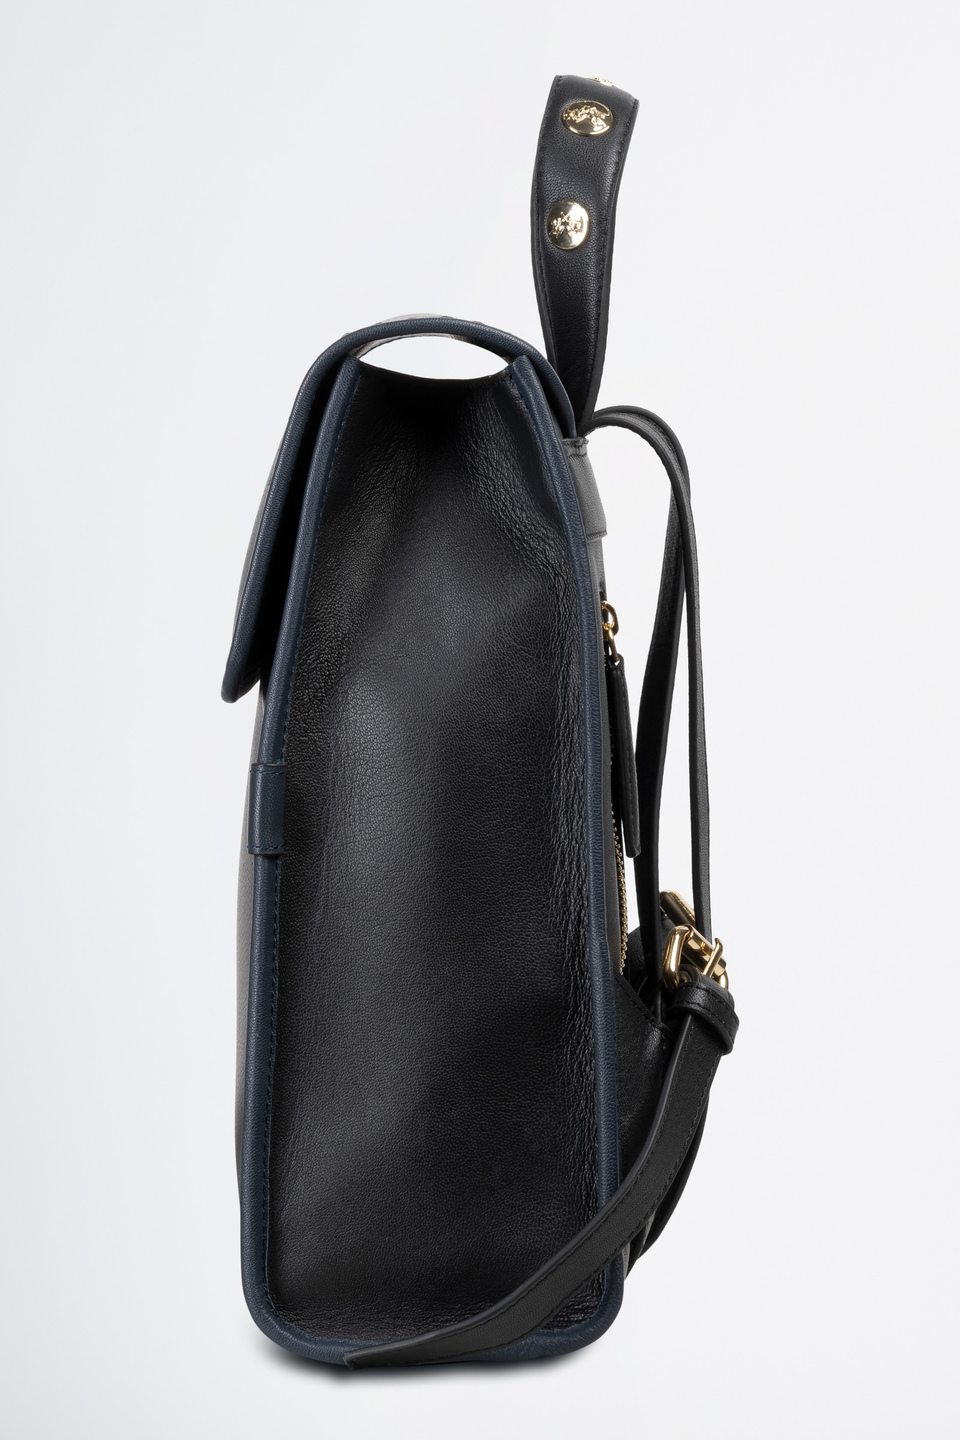 Backpack in calf leather leather | La Martina - Official Online Shop